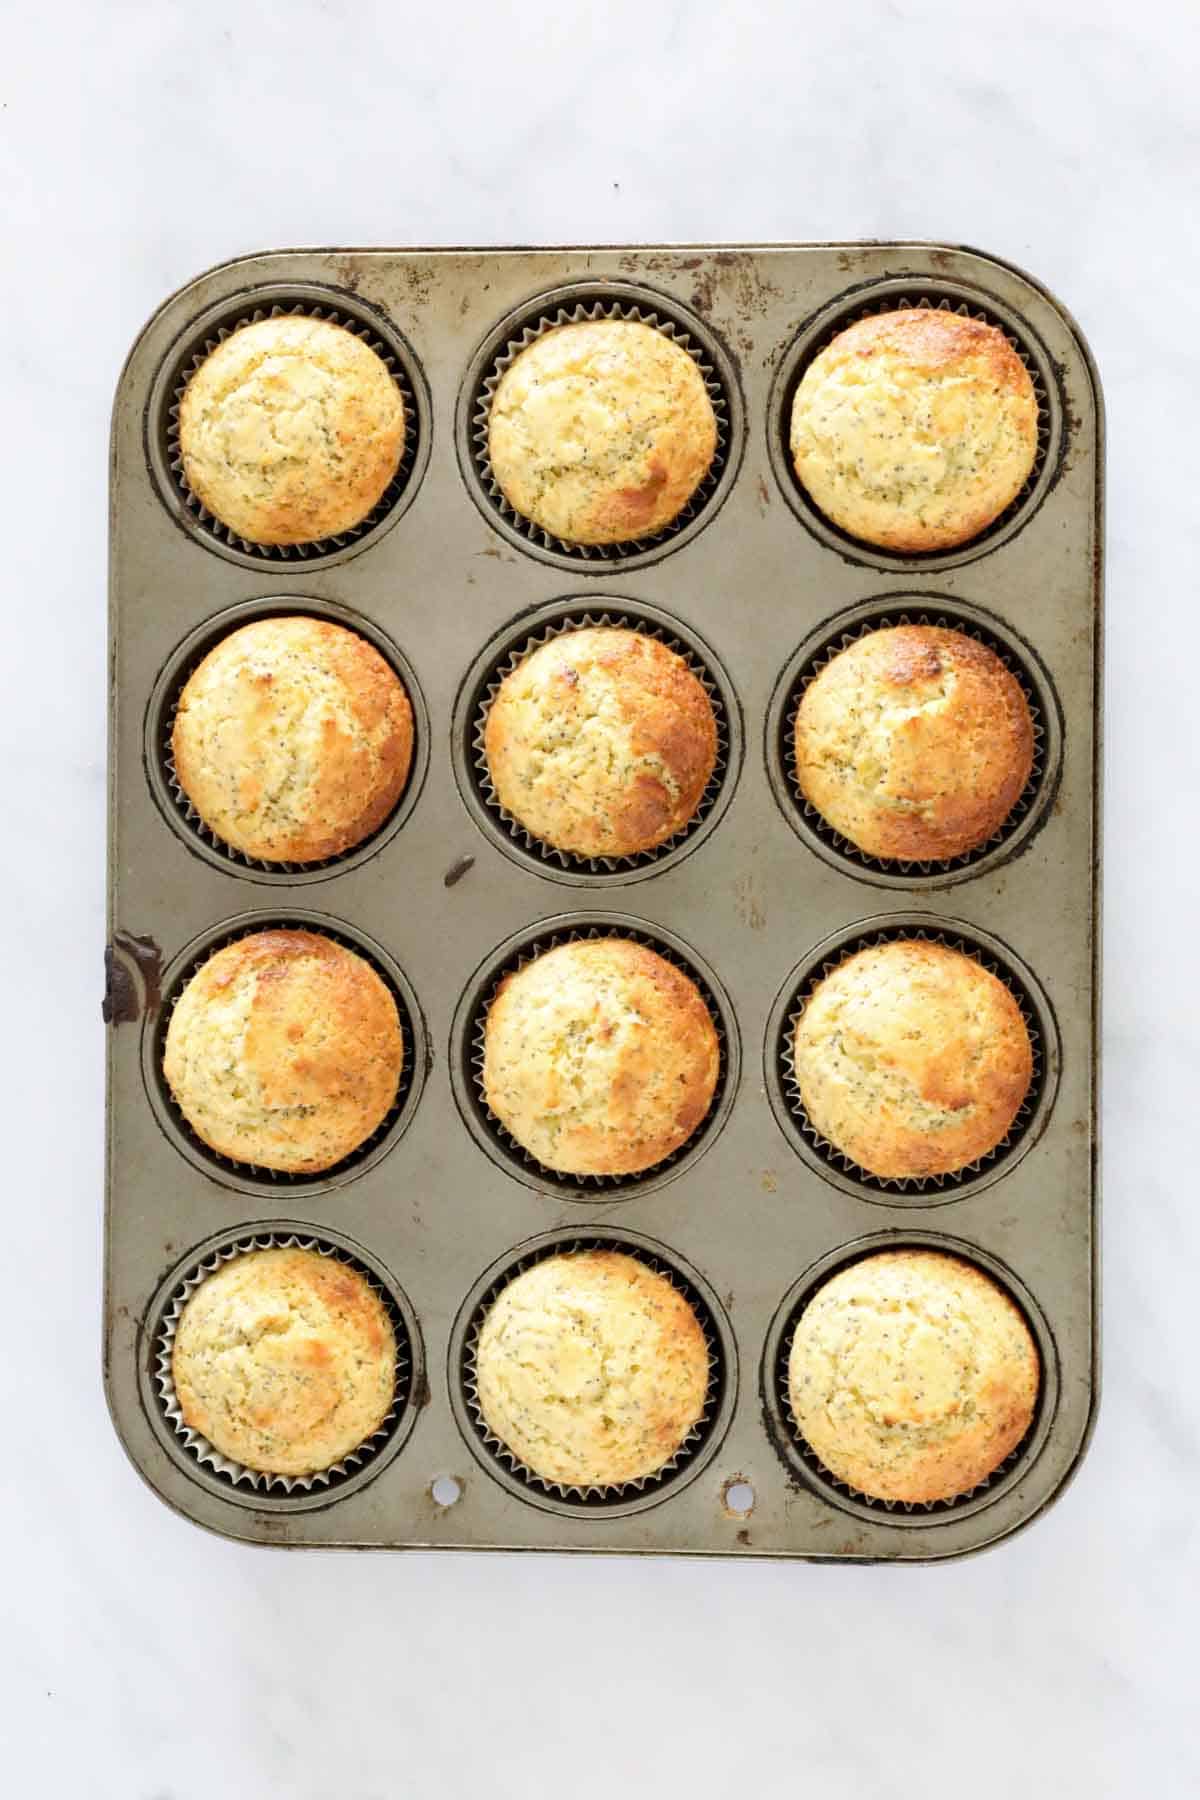 Freshly baked un-iced lemon and poppyseed muffins in a muffin baking tin.